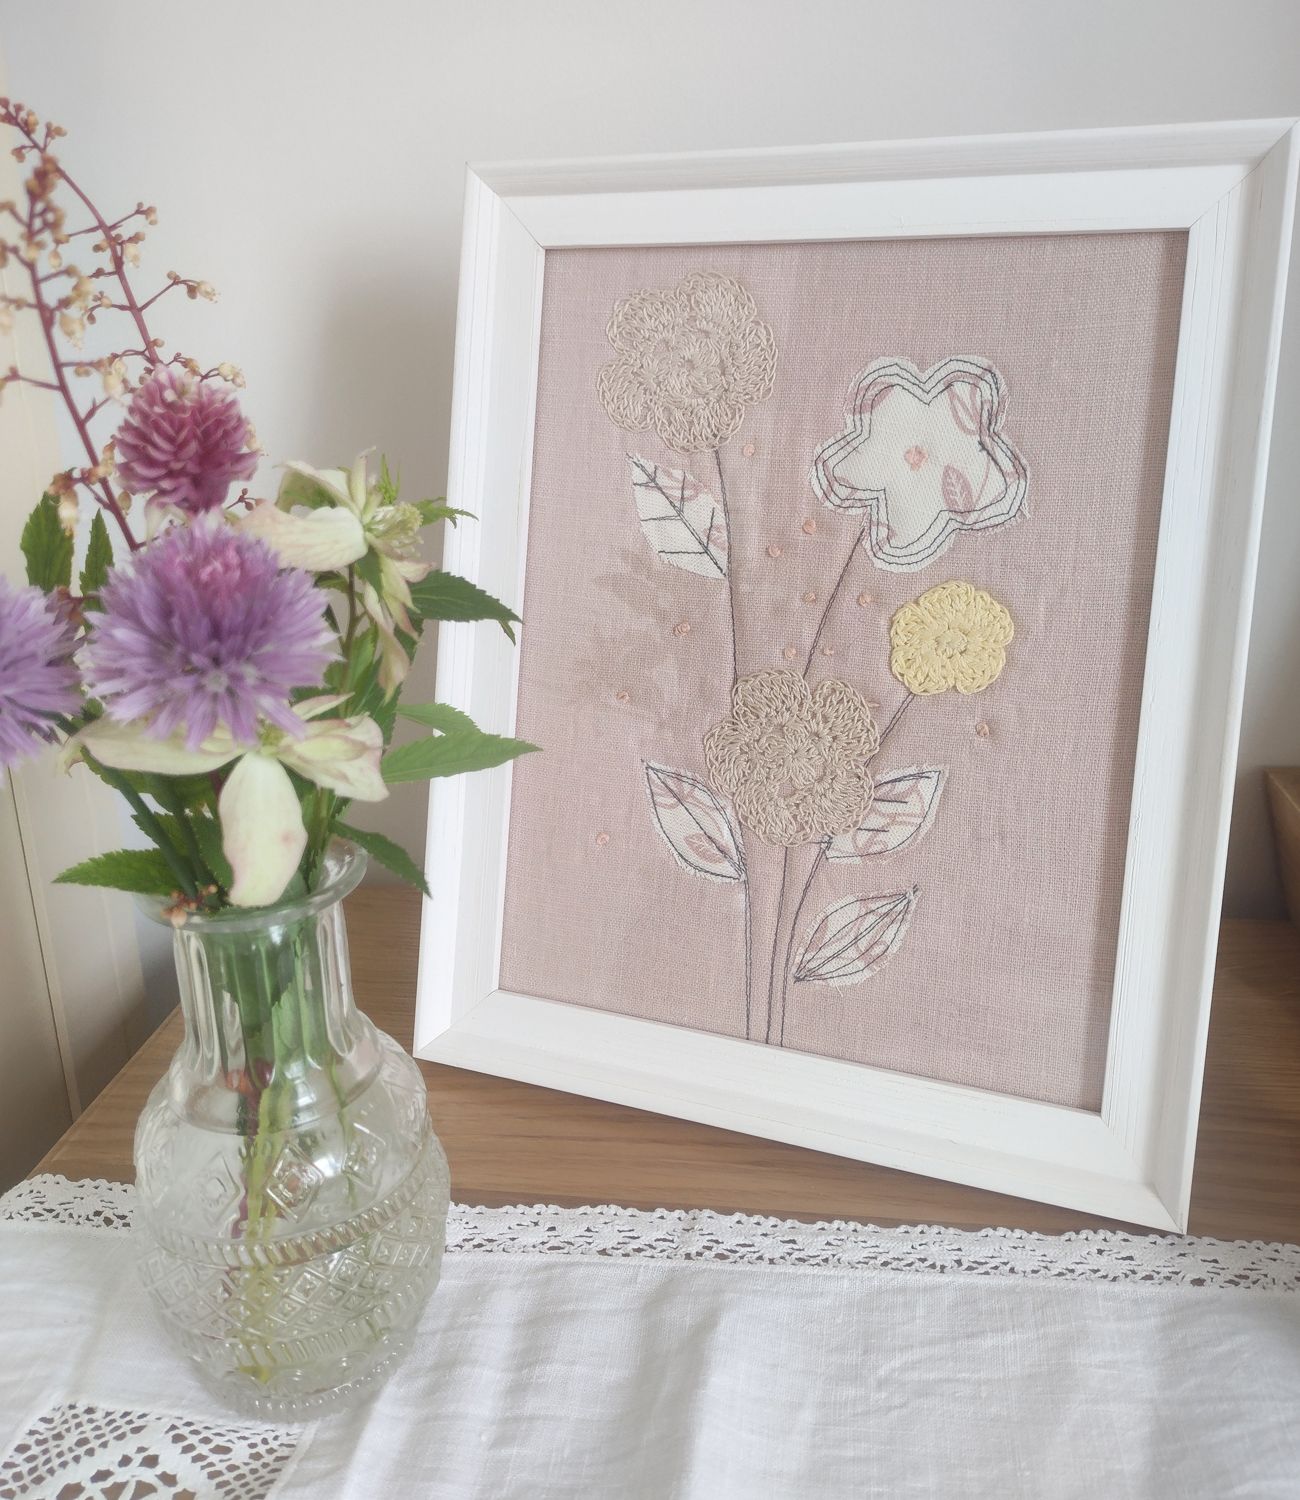 Botanical inspired handmade textile picture ercheted lavender guifts